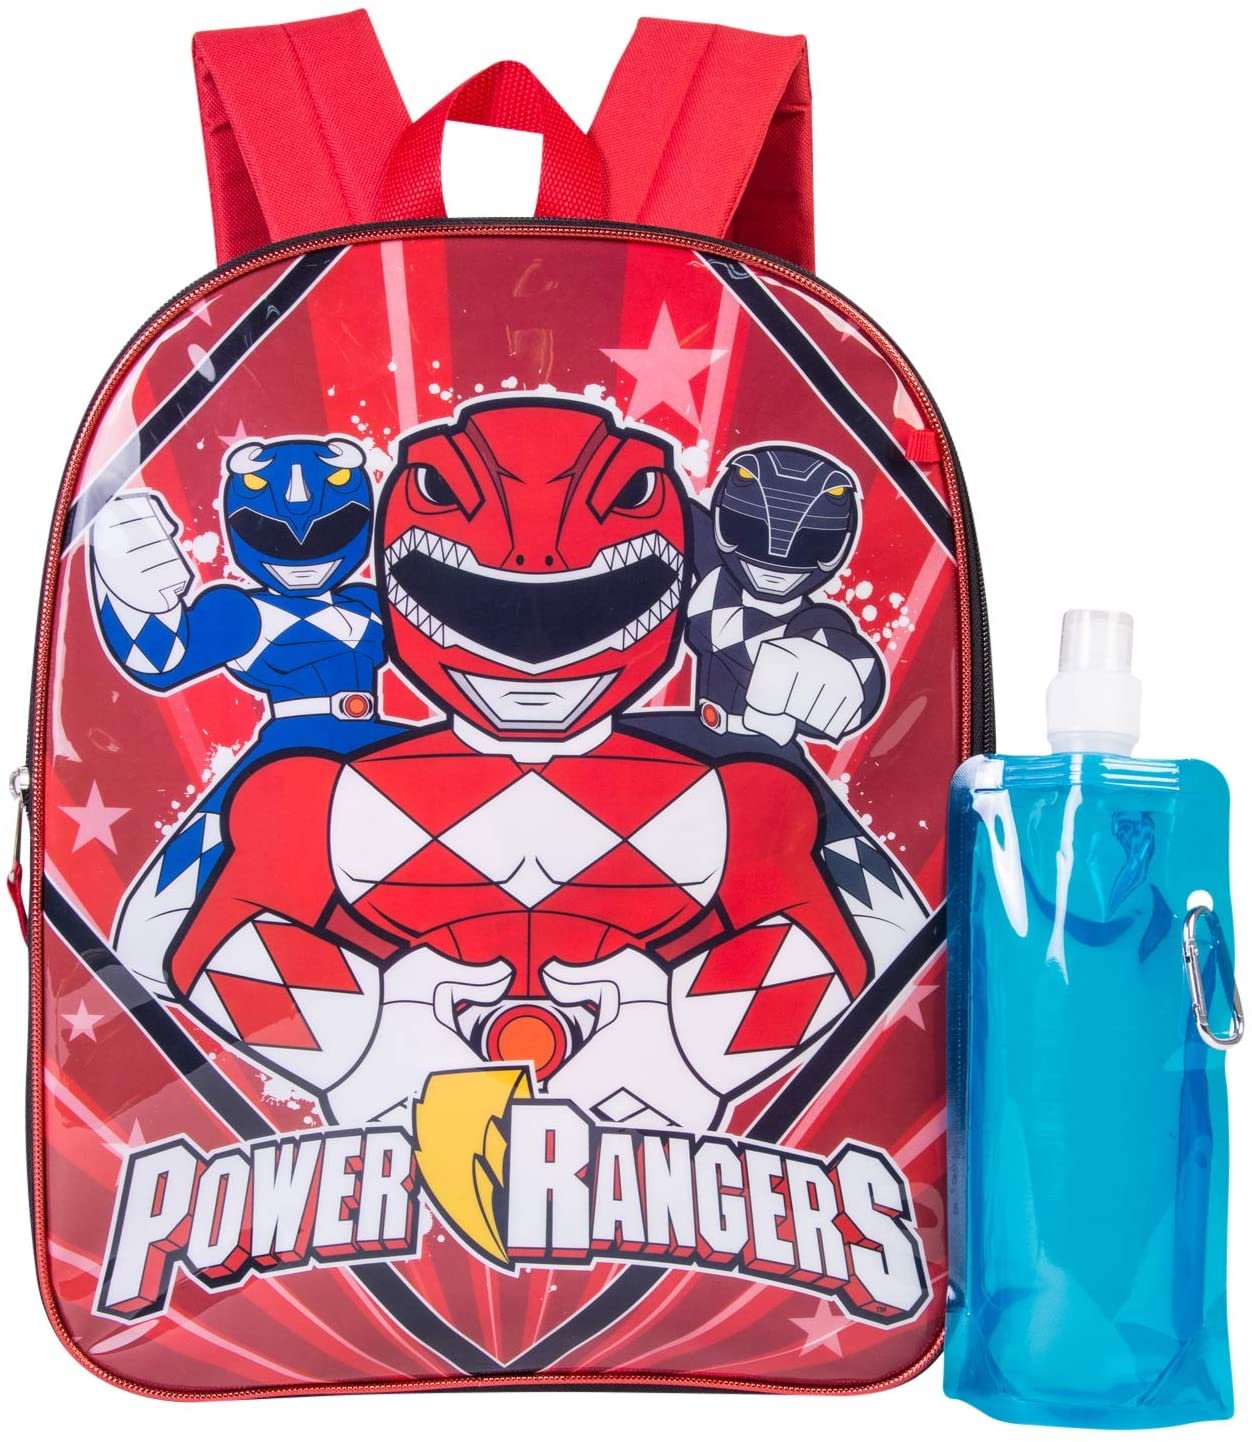 Power Rangers Backpack Combo Set - Power Rangers Boys' 3 Piece Backpack Set - Backpack, Waterbottle and Carabina Black/Red - image 1 of 3